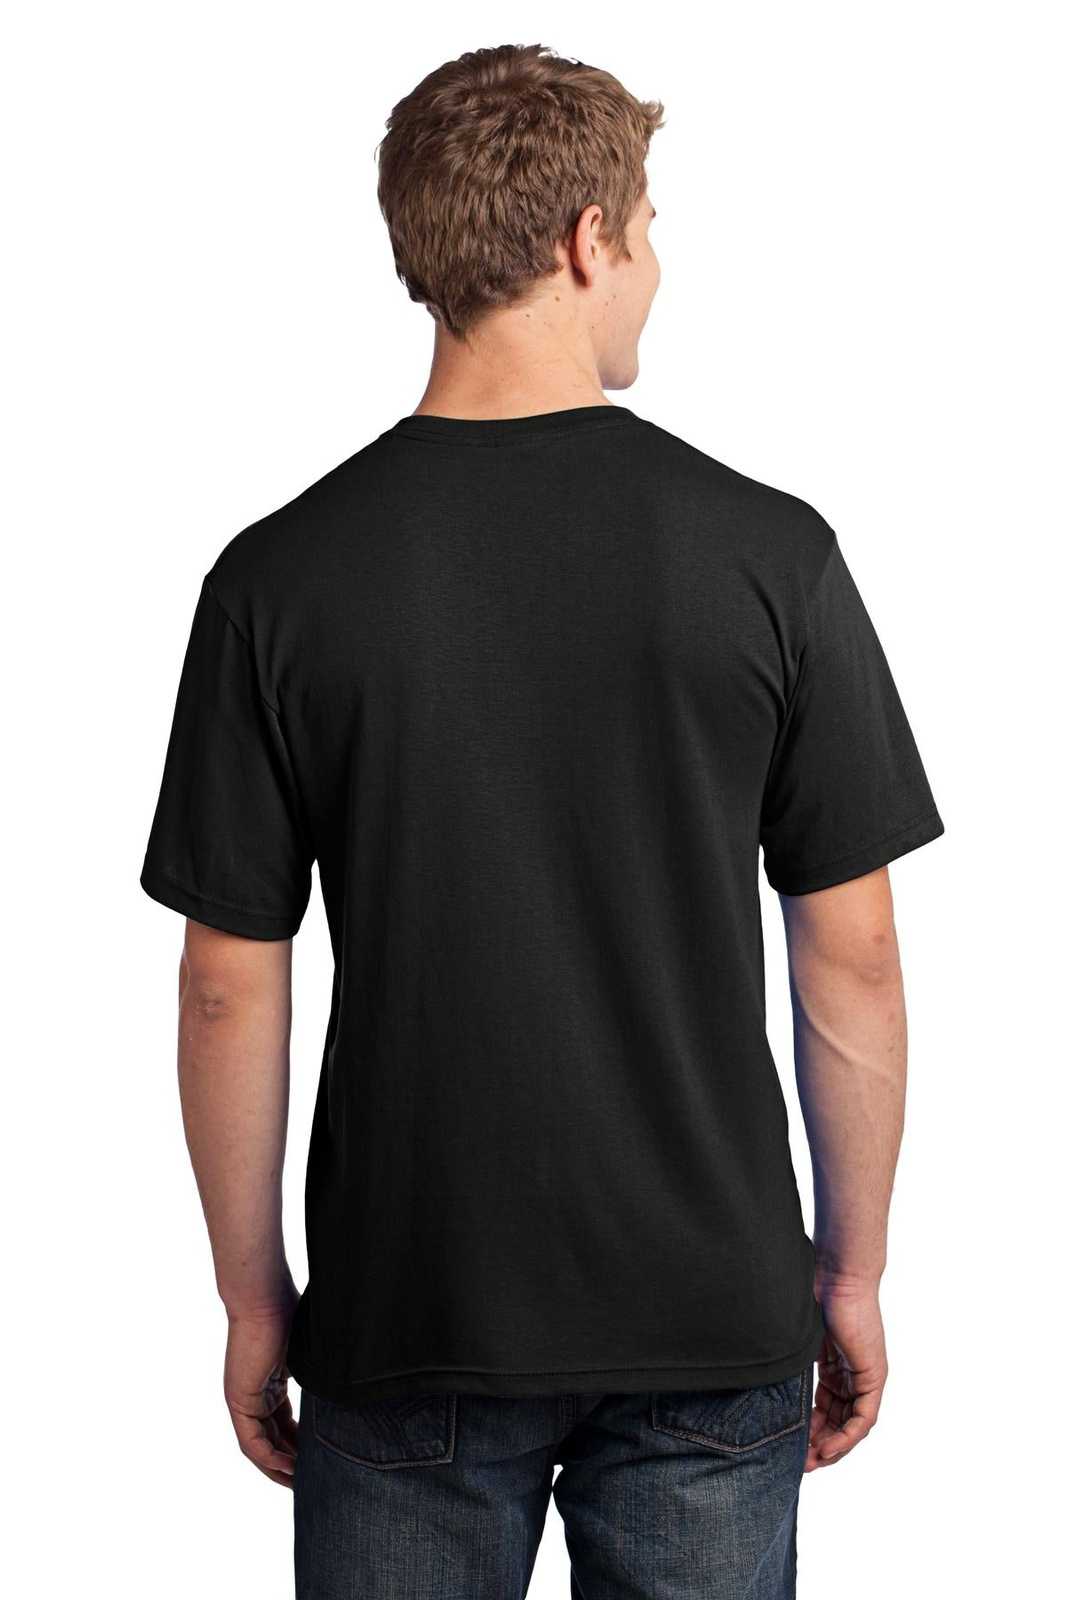 Port &amp; Company USA100 All-American Tee - Black - HIT a Double - 2